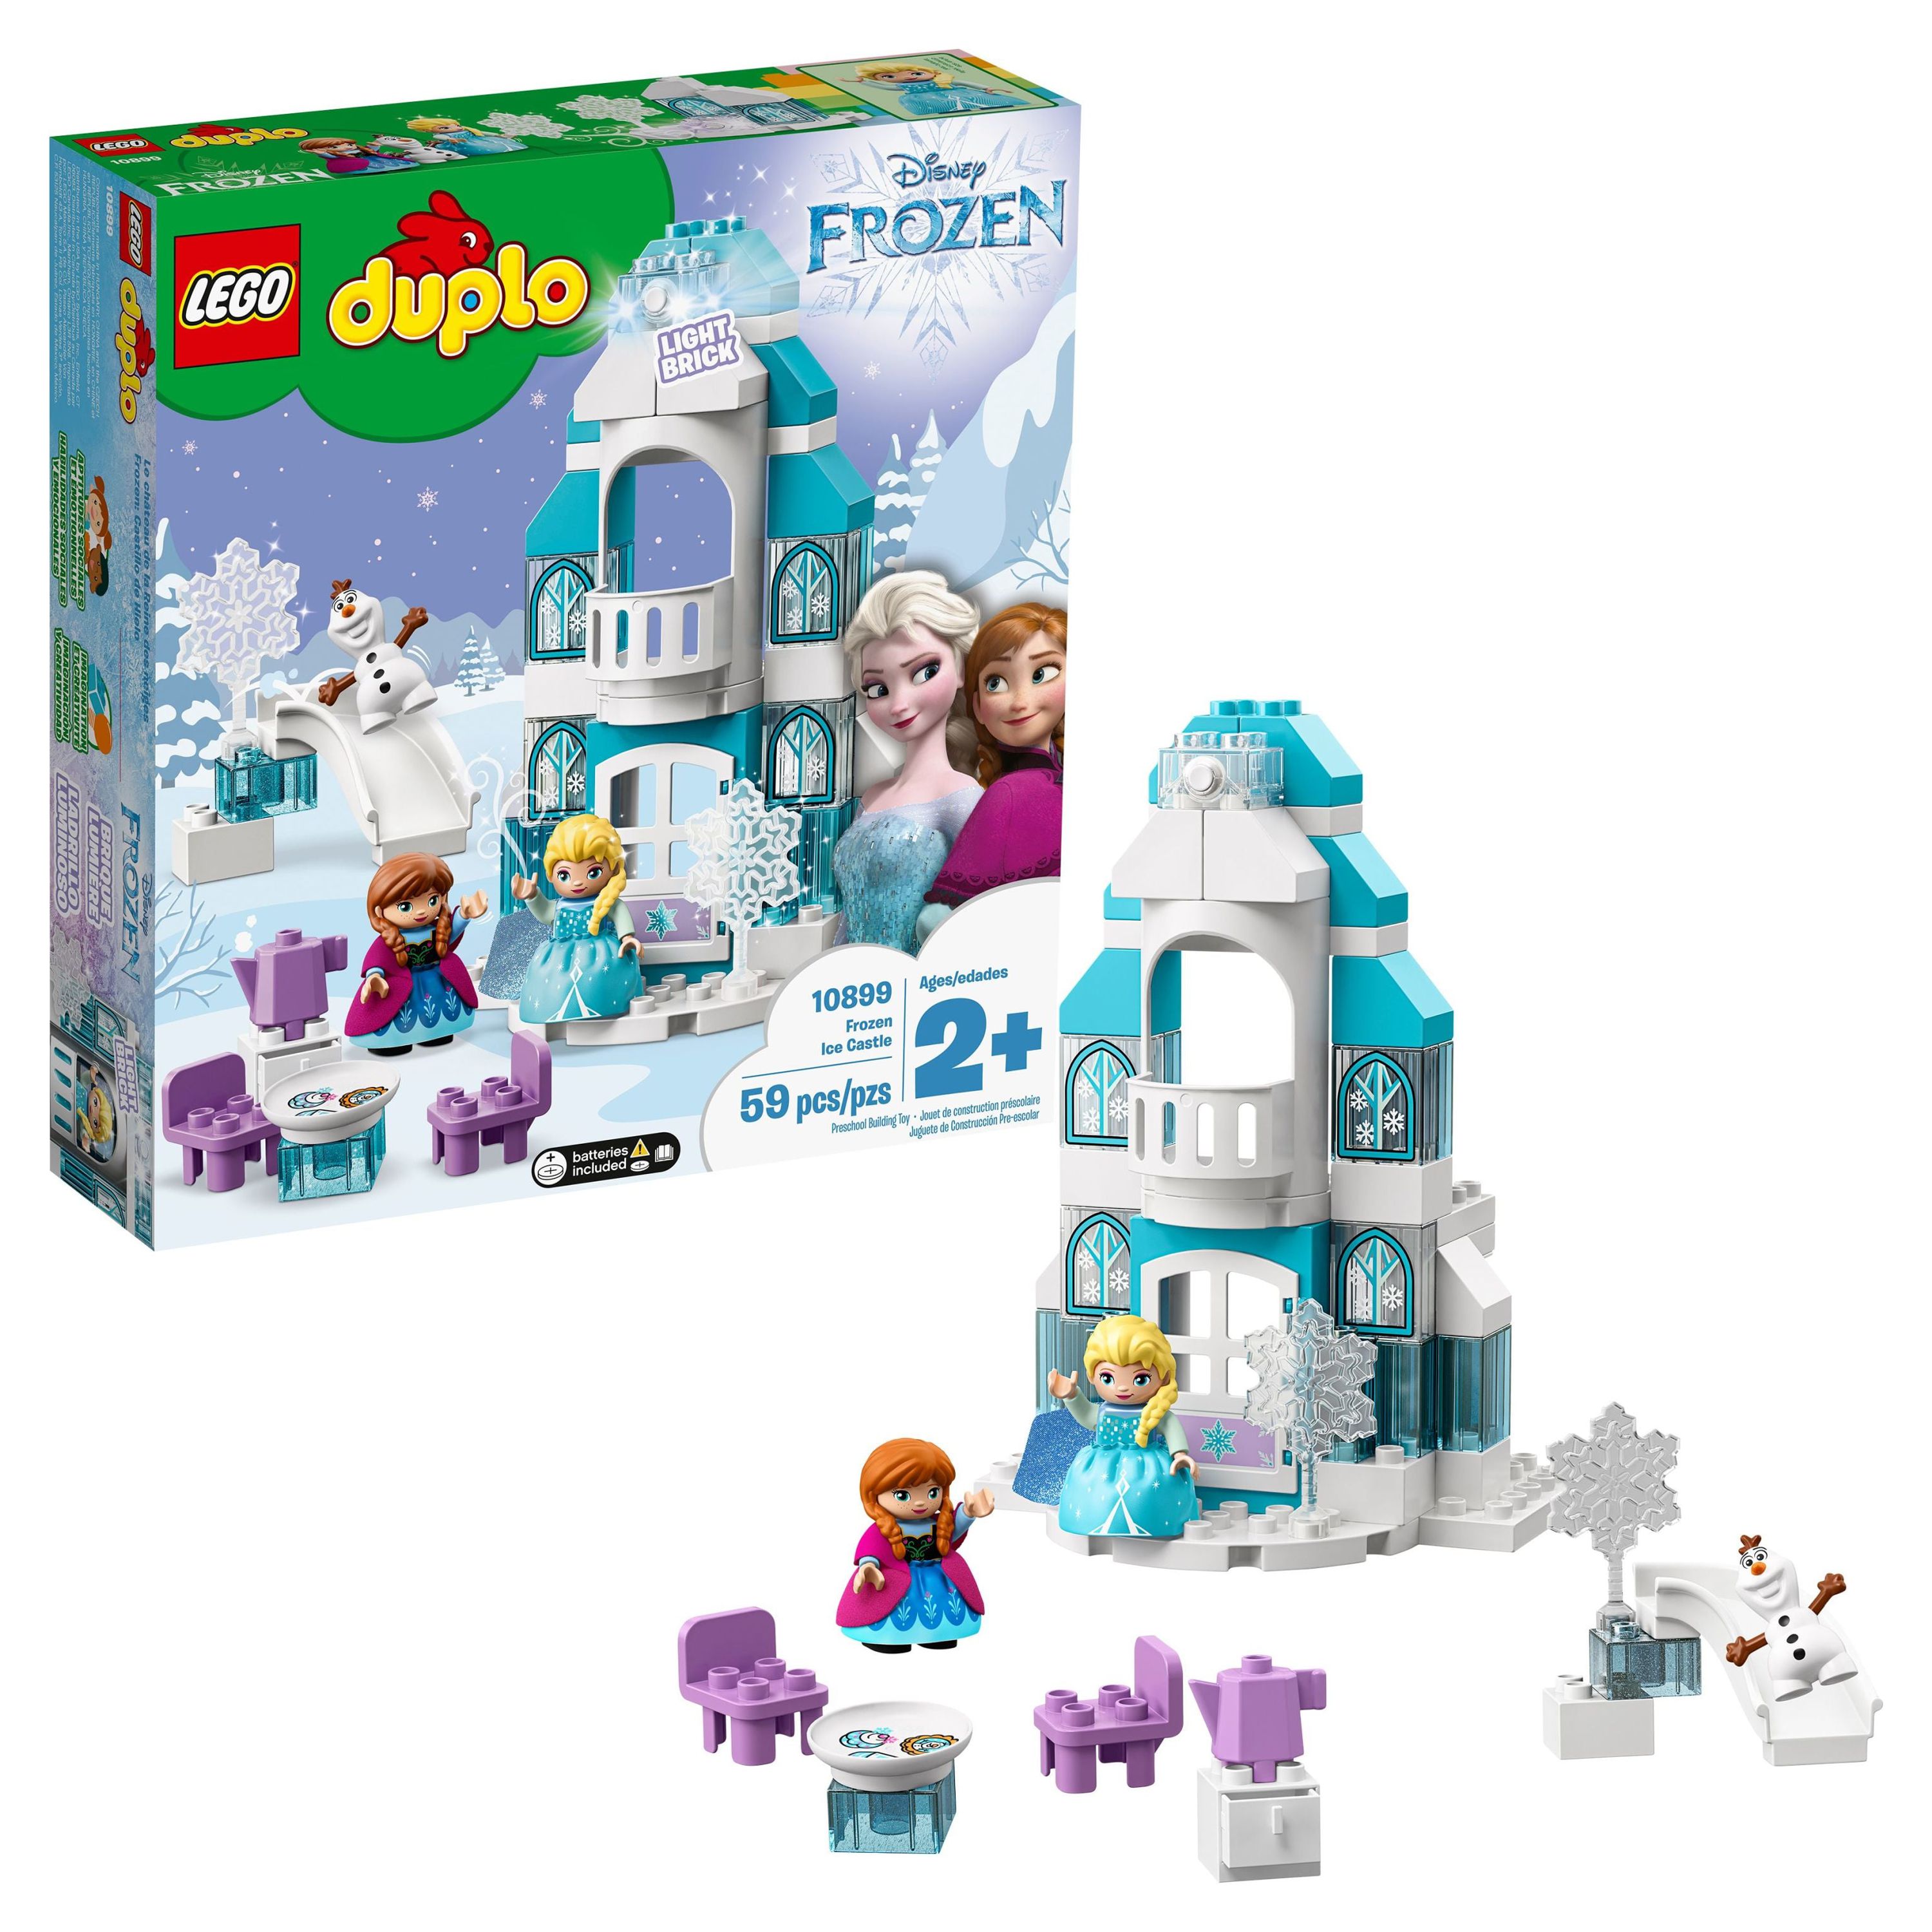 LEGO DUPLO Disney Princess Frozen Ice Castle 10899 Building Toy with Light Brick, Princess Elsa and Anna Mini-Dolls plus Olaf Figure, Gifts for 2 Year Old Toddlers, Girls & Boys - image 1 of 3